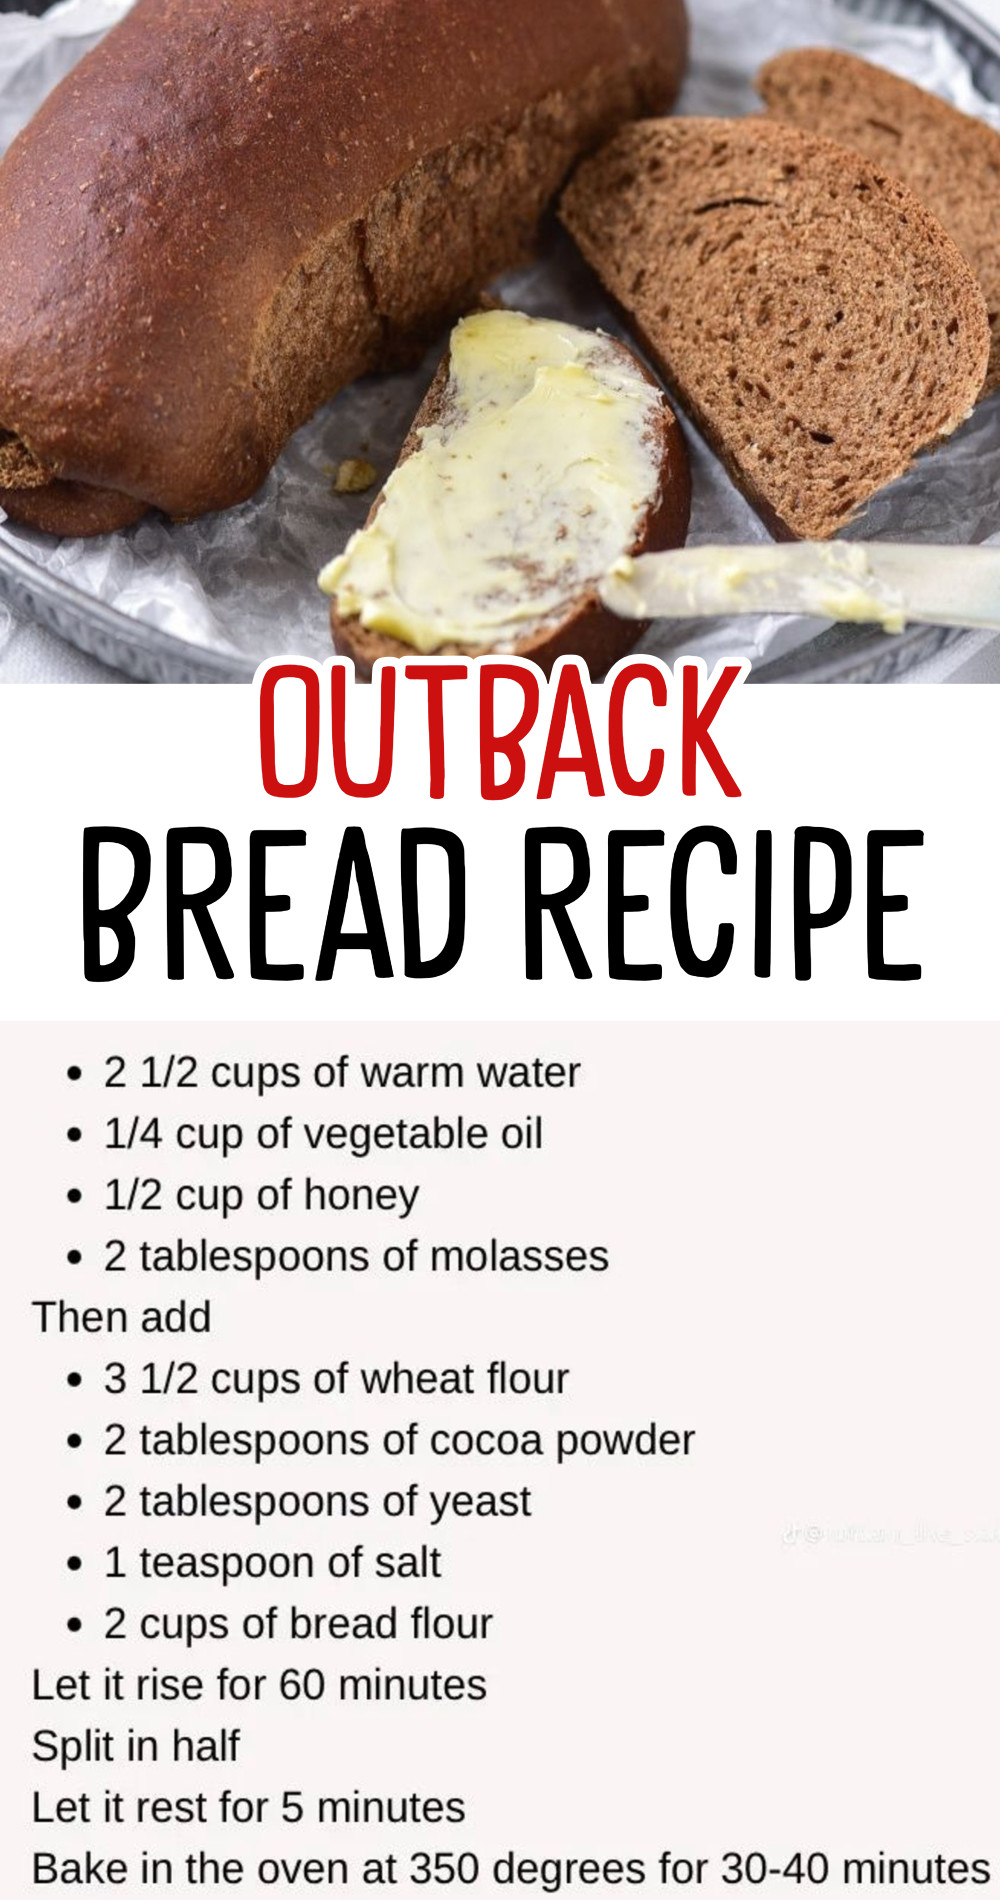 Outback Bread Recipe - Outback Steakhouse Restaurant copy cat recipes